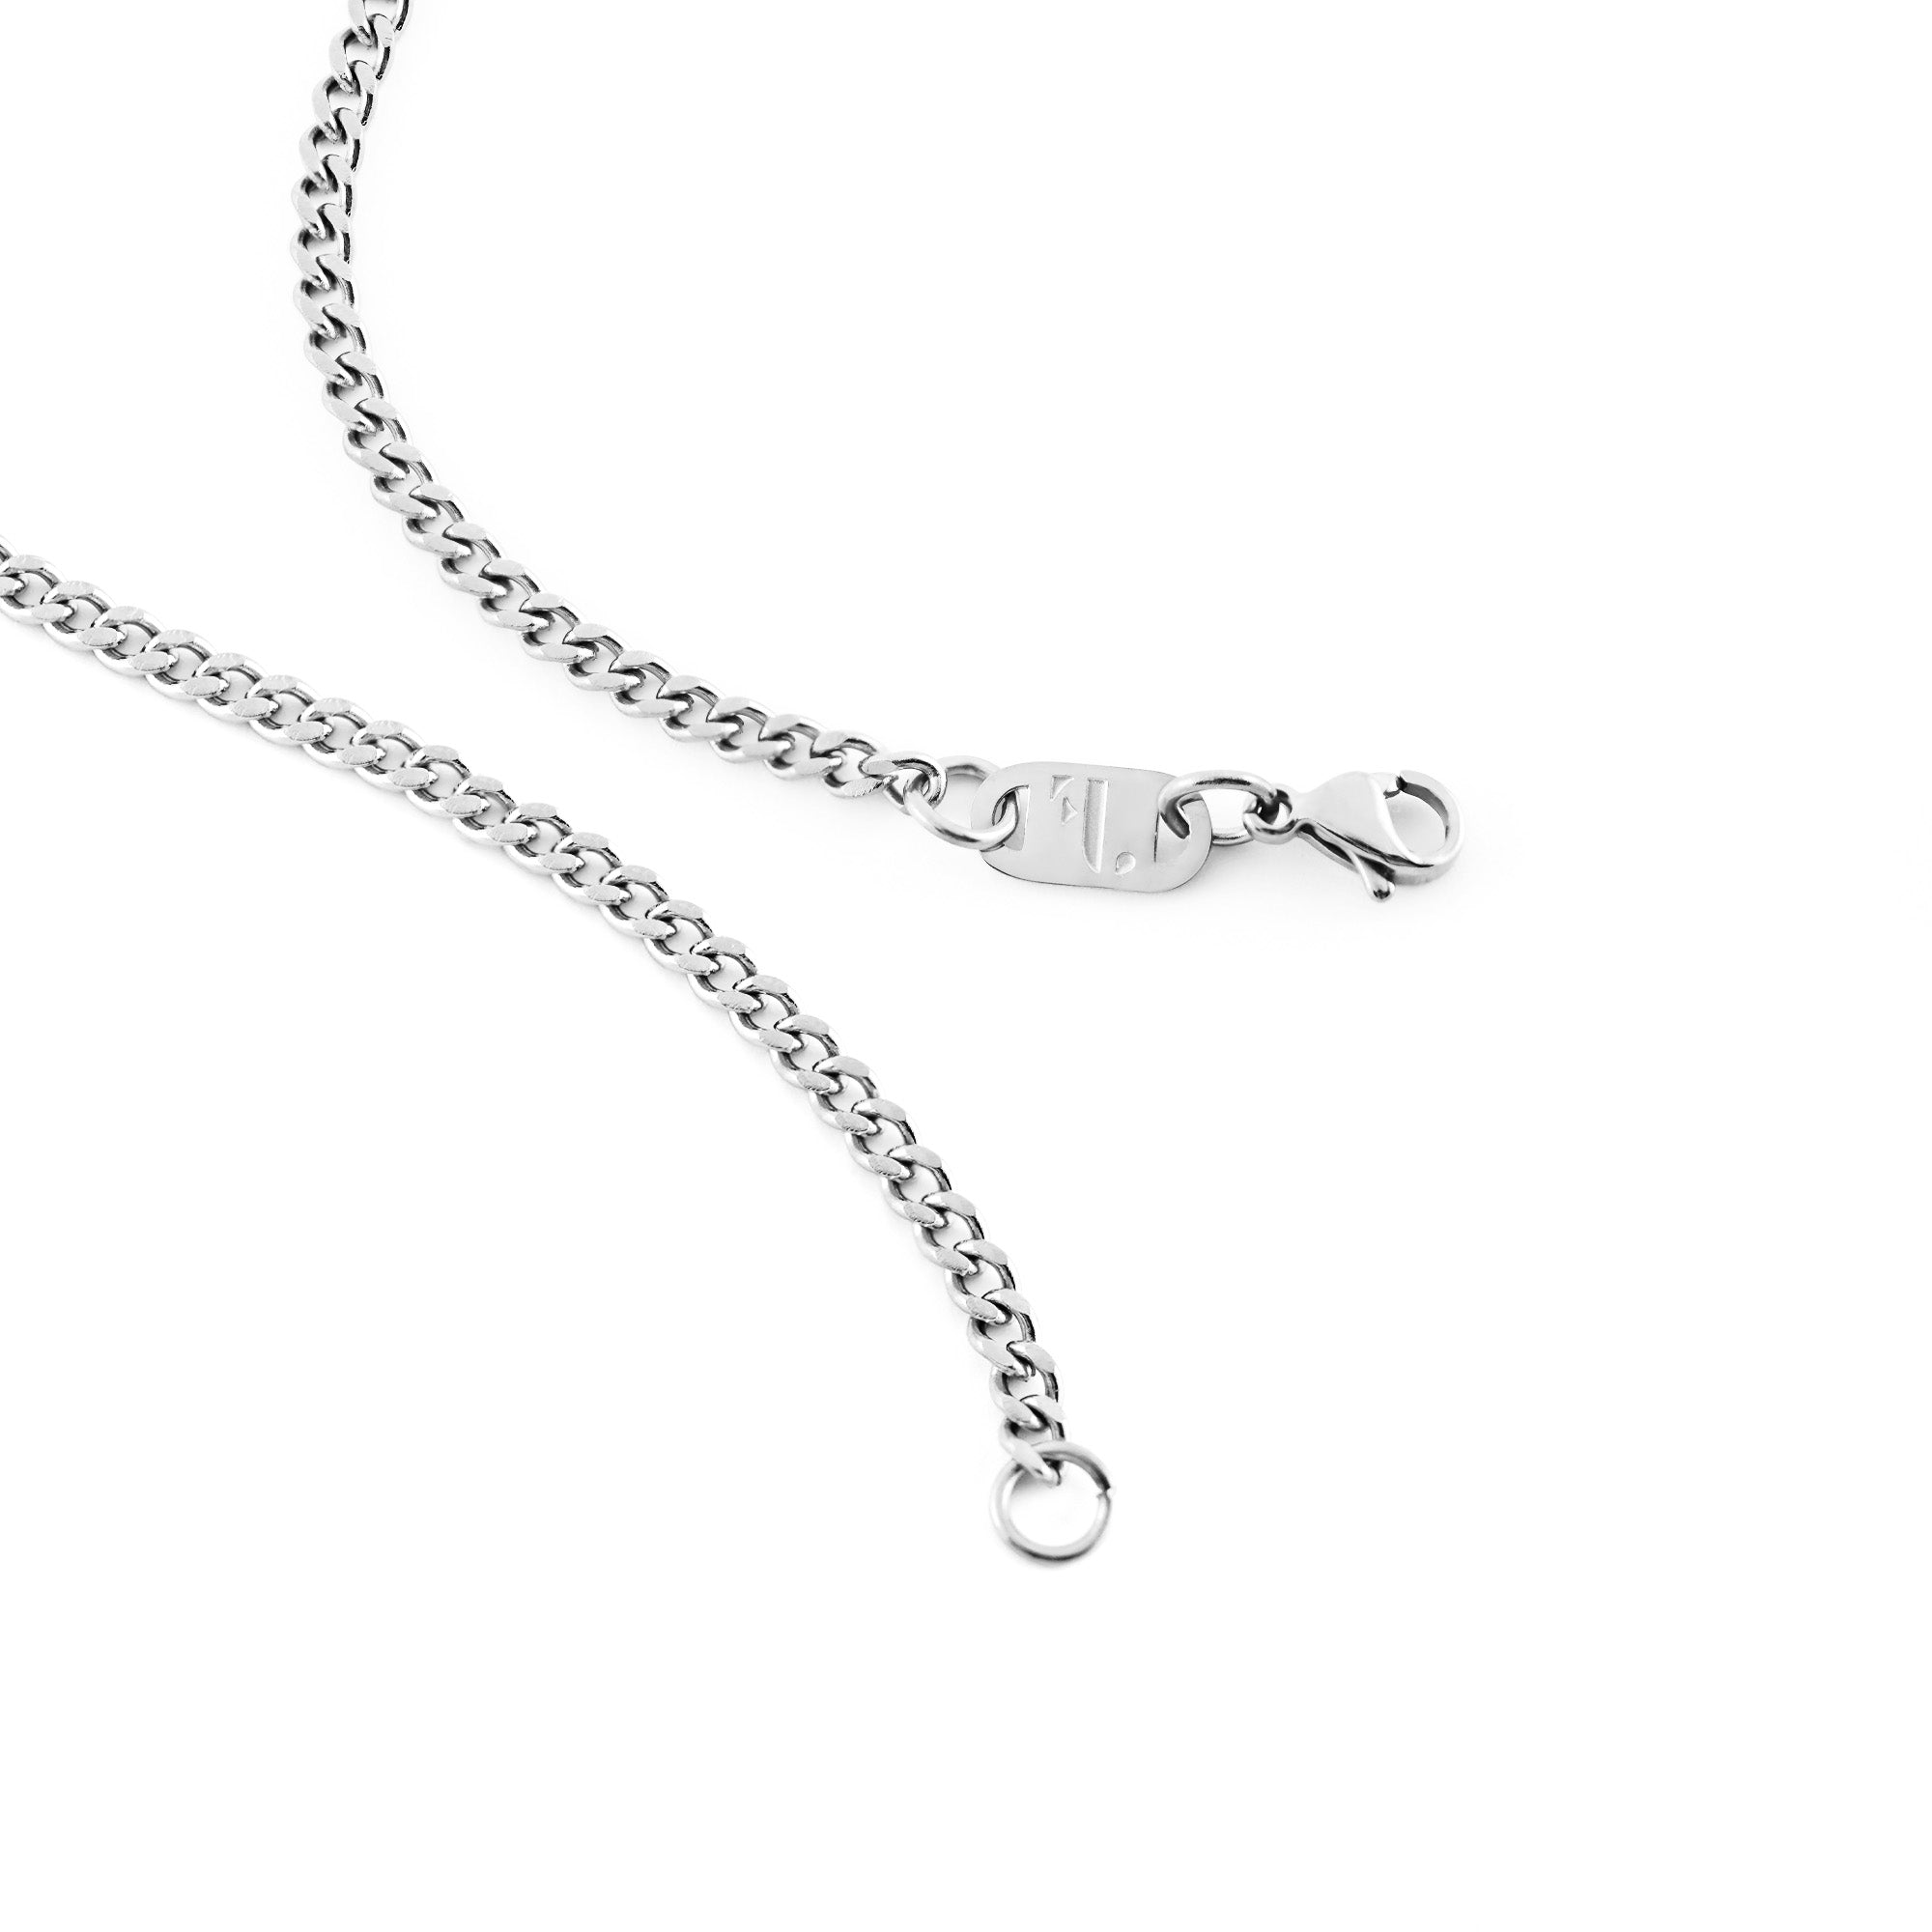 St-Laurent men's necklace by Five Jwlry, featuring a thin 3mm flat Cuban chain in silver stainless steel. Hypoallergenic, waterproof, and backed by a 2-year warranty.